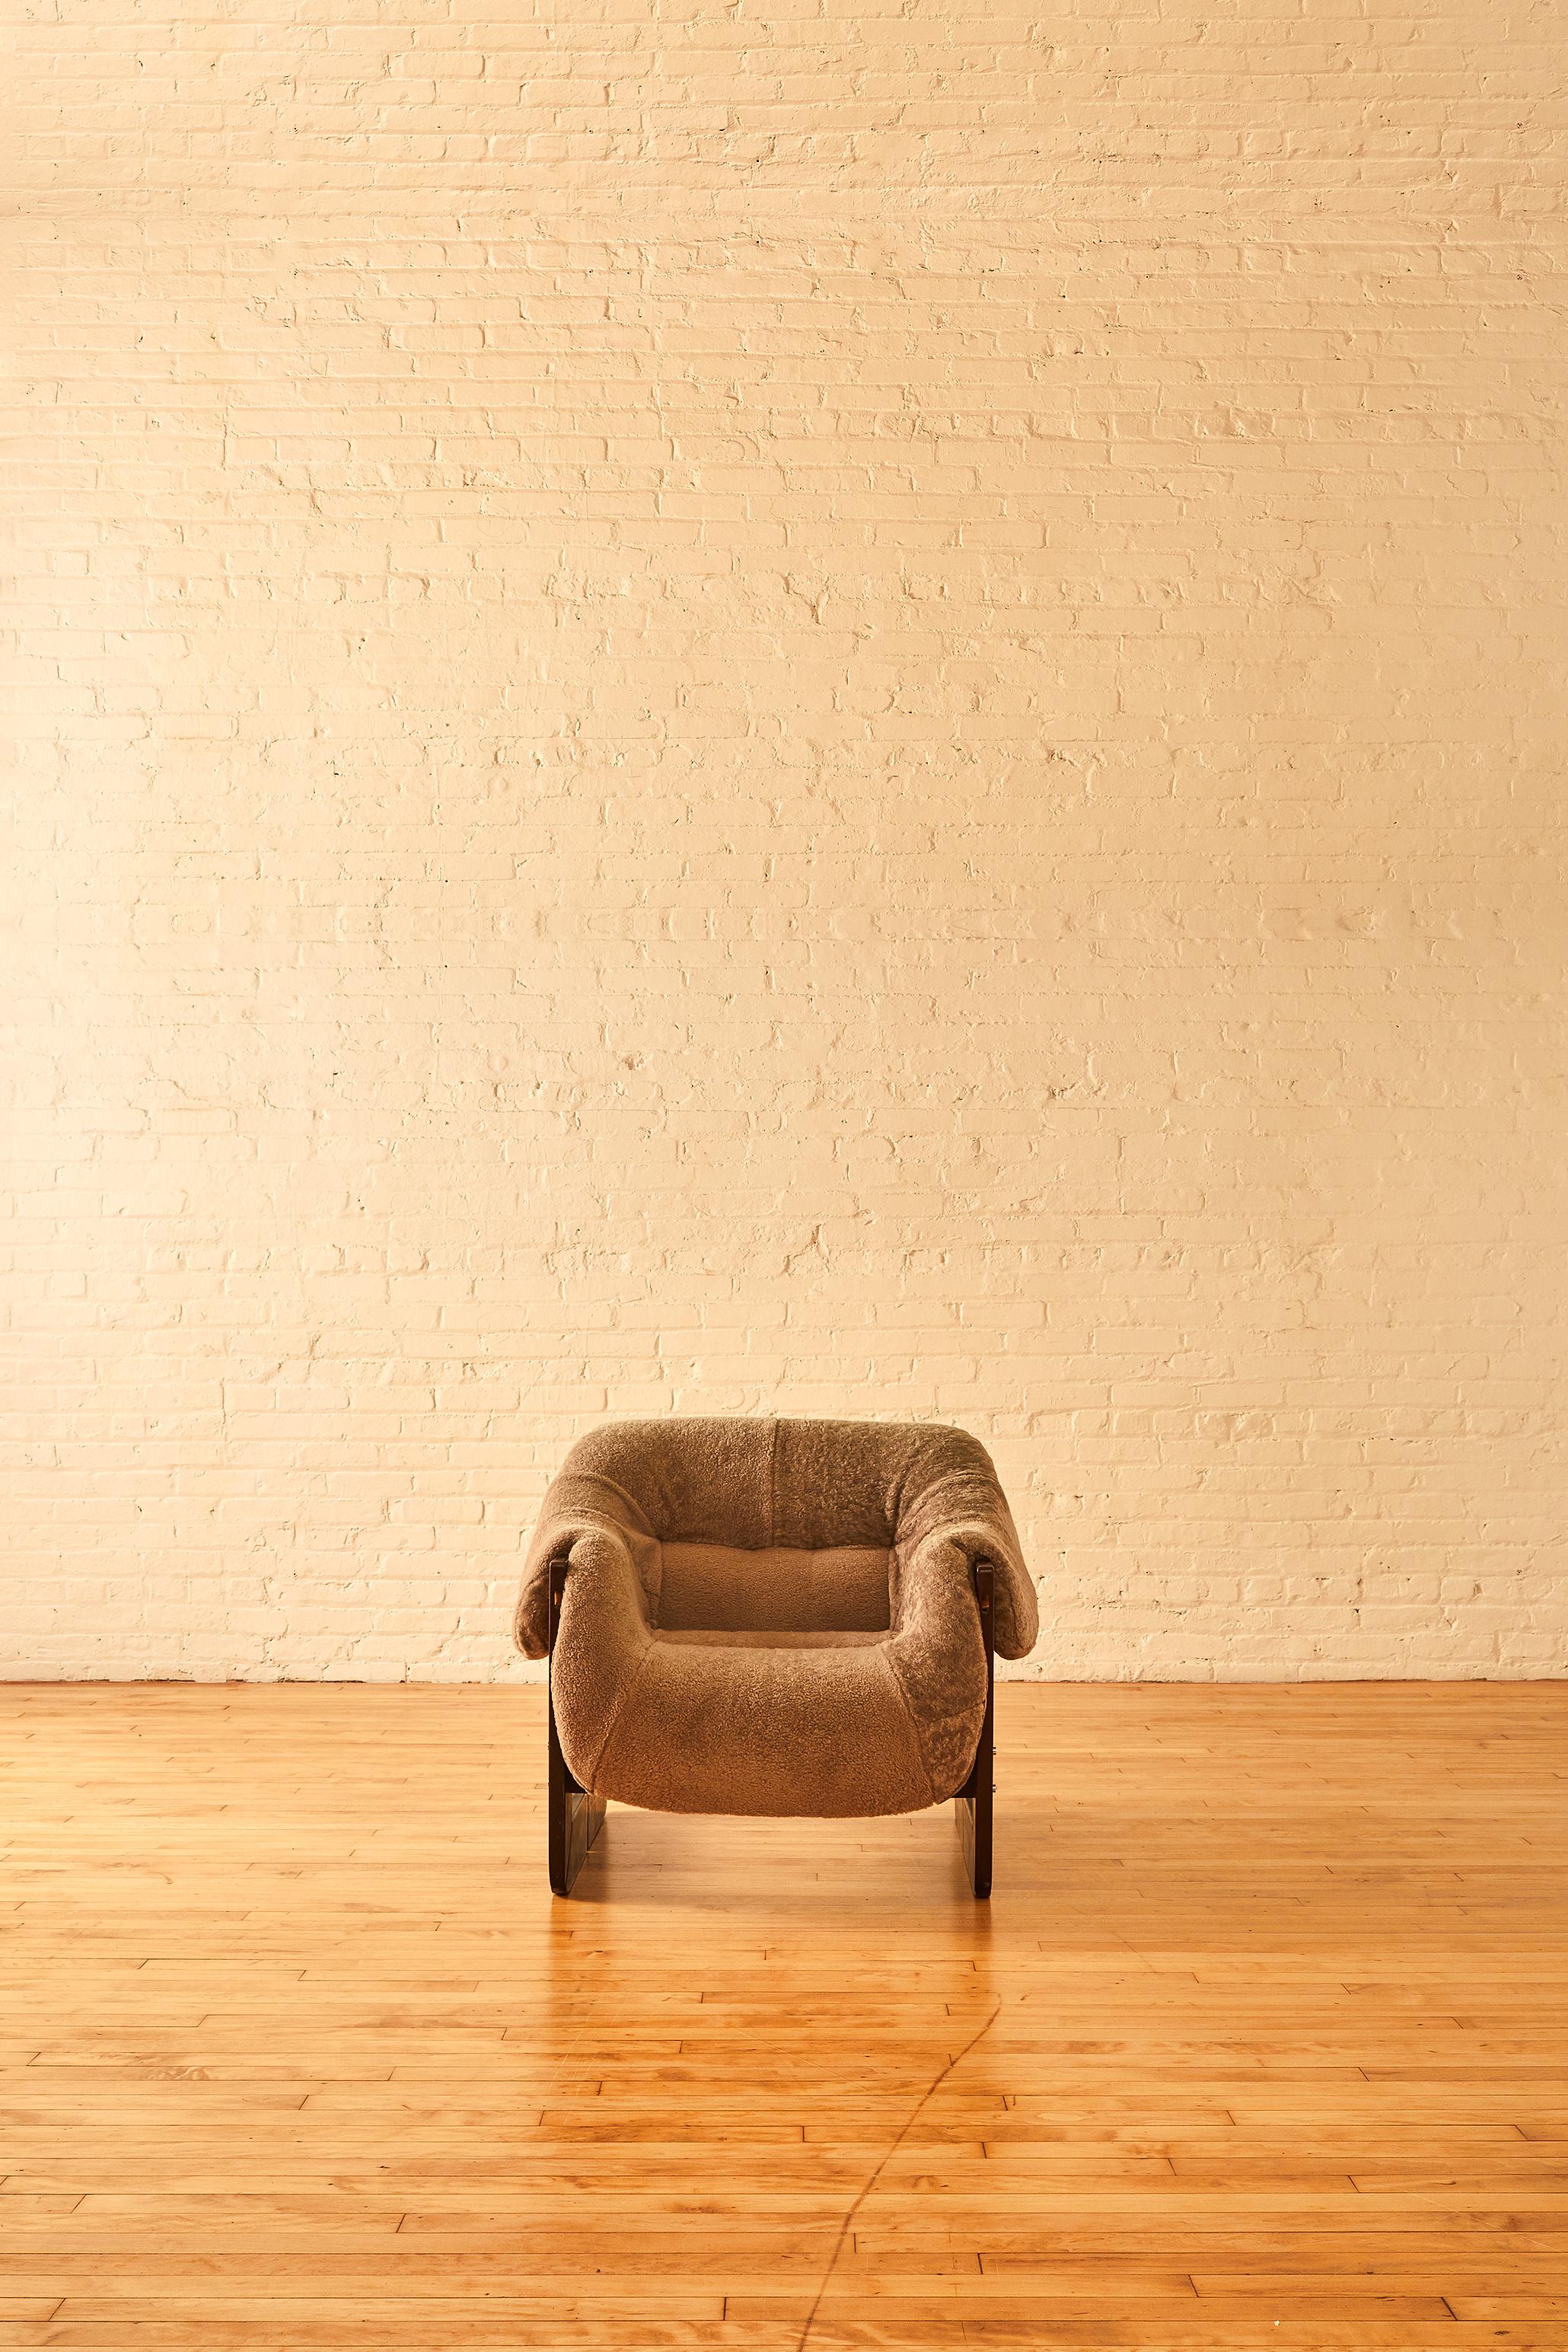 Percival Lafer MP-97 lounge chair with lush grey shearling upholstery. The chair is composed of jatoba wood, and features leather straps, and foam padding.

